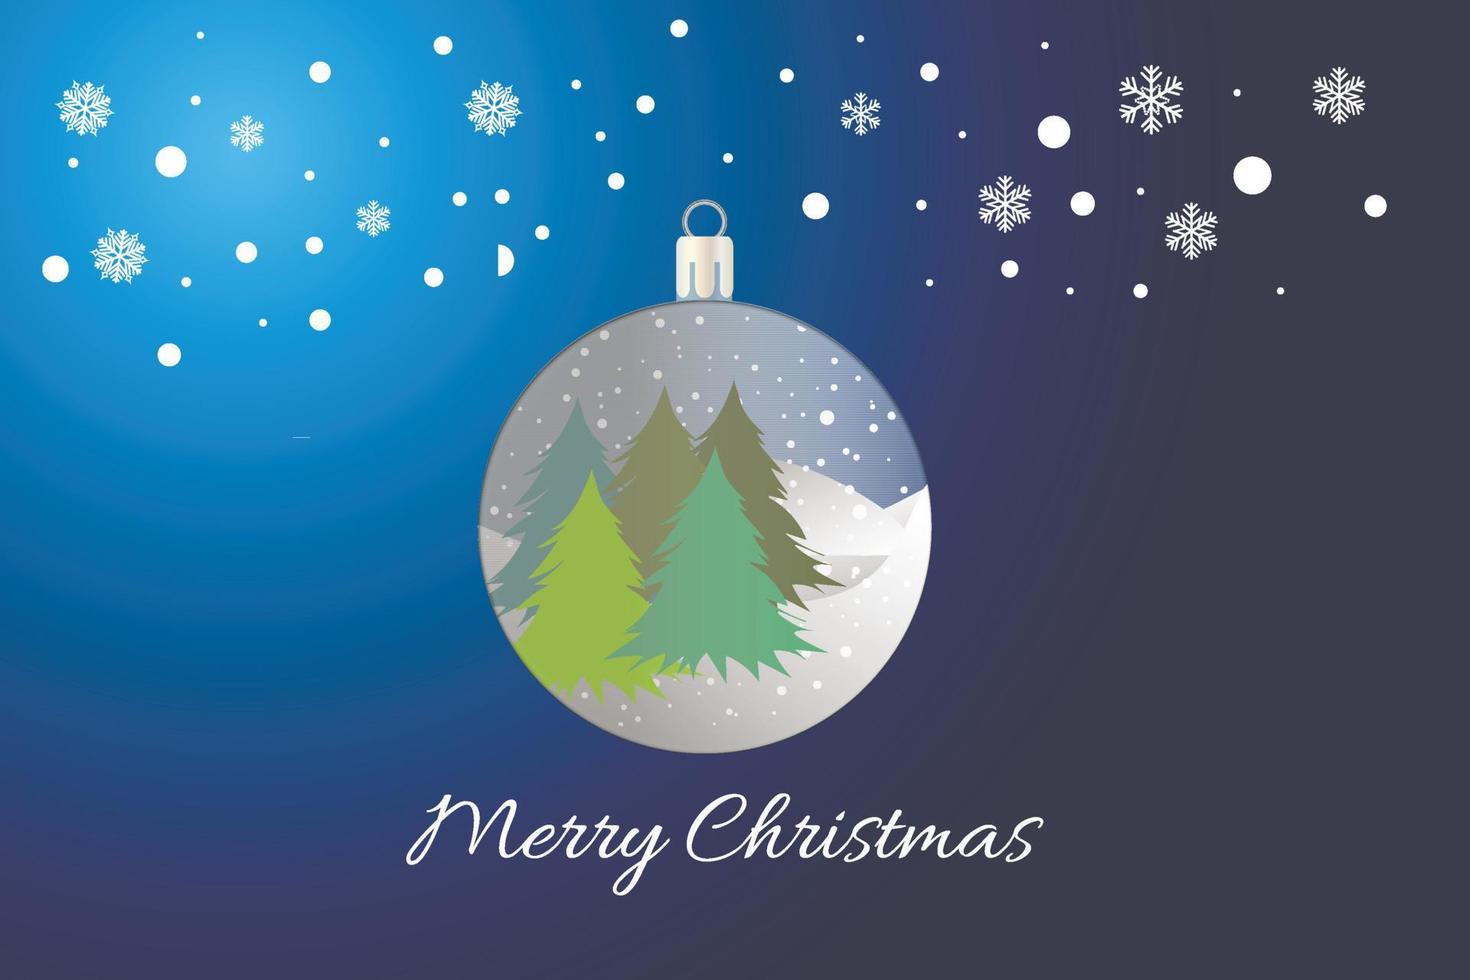 Merry Christmas  and happy new year 2023 modern background vector